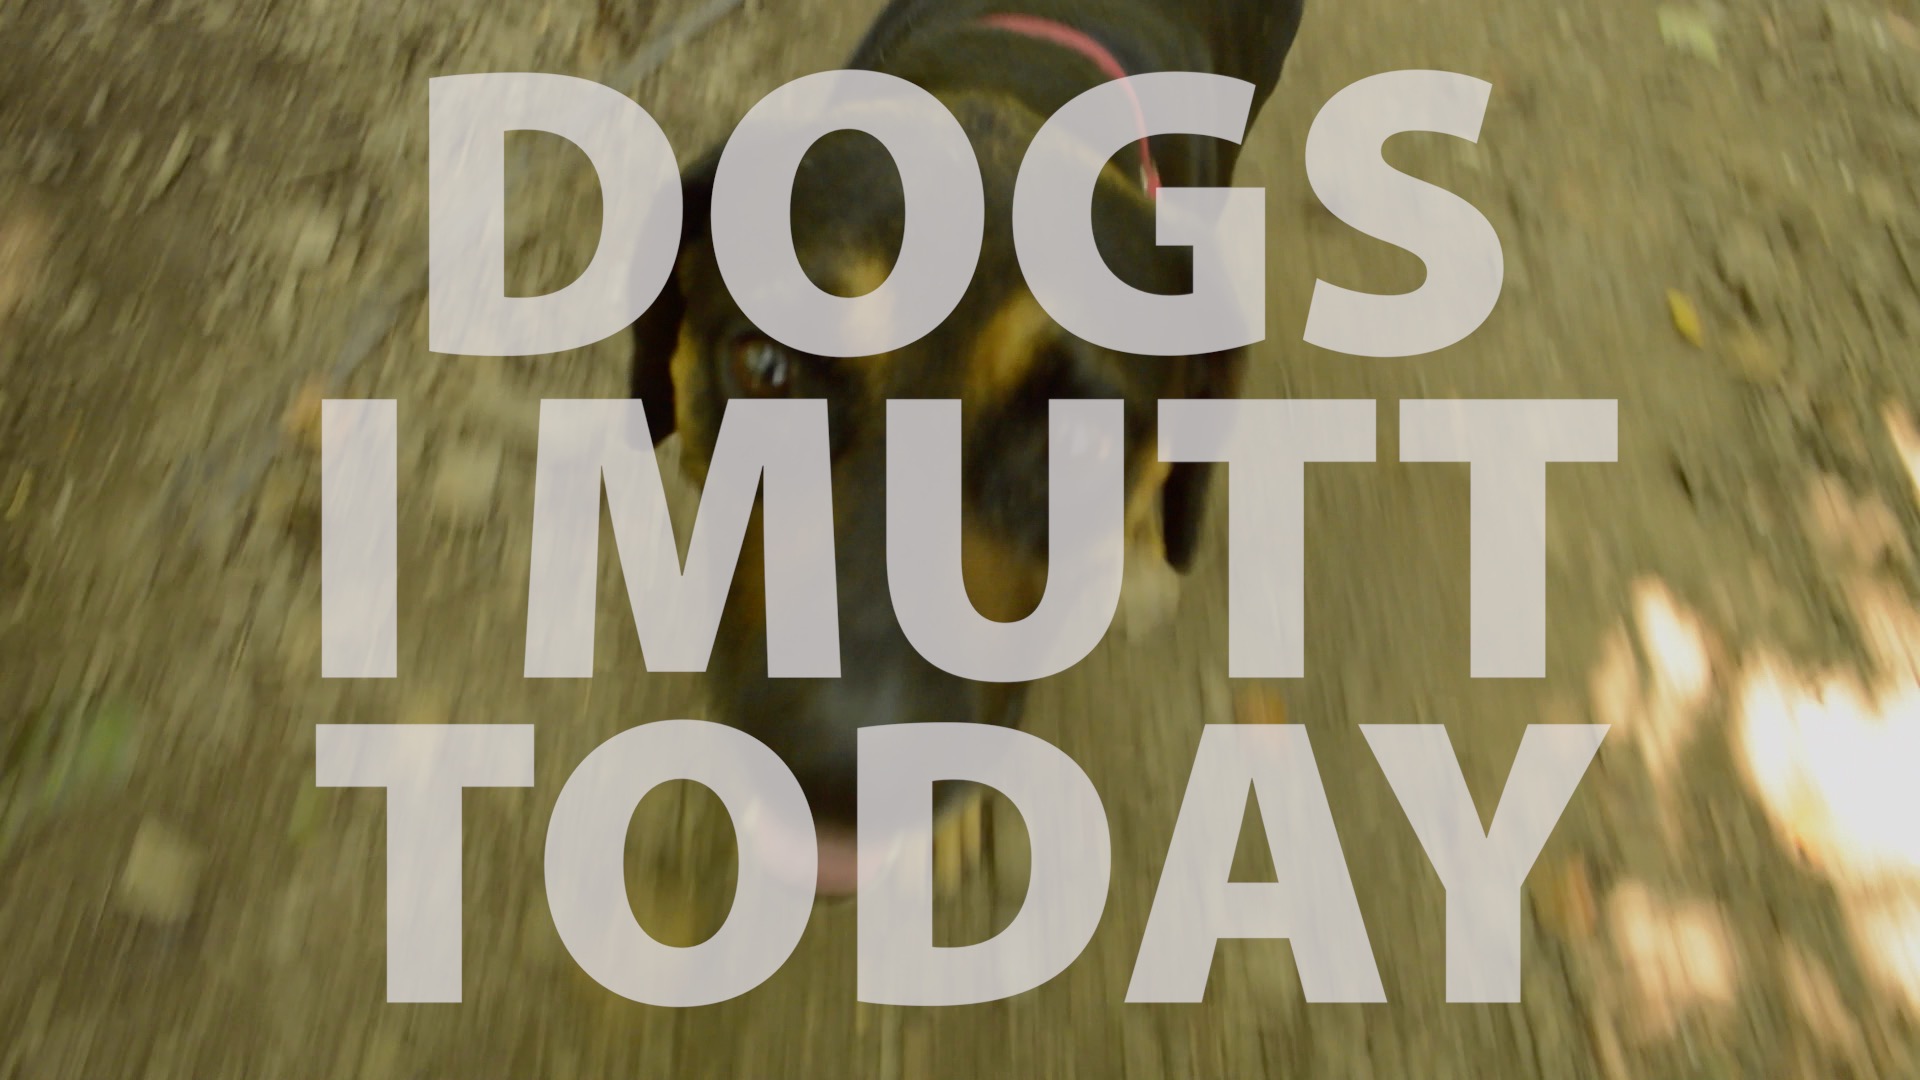 Dogs I Mutt Today